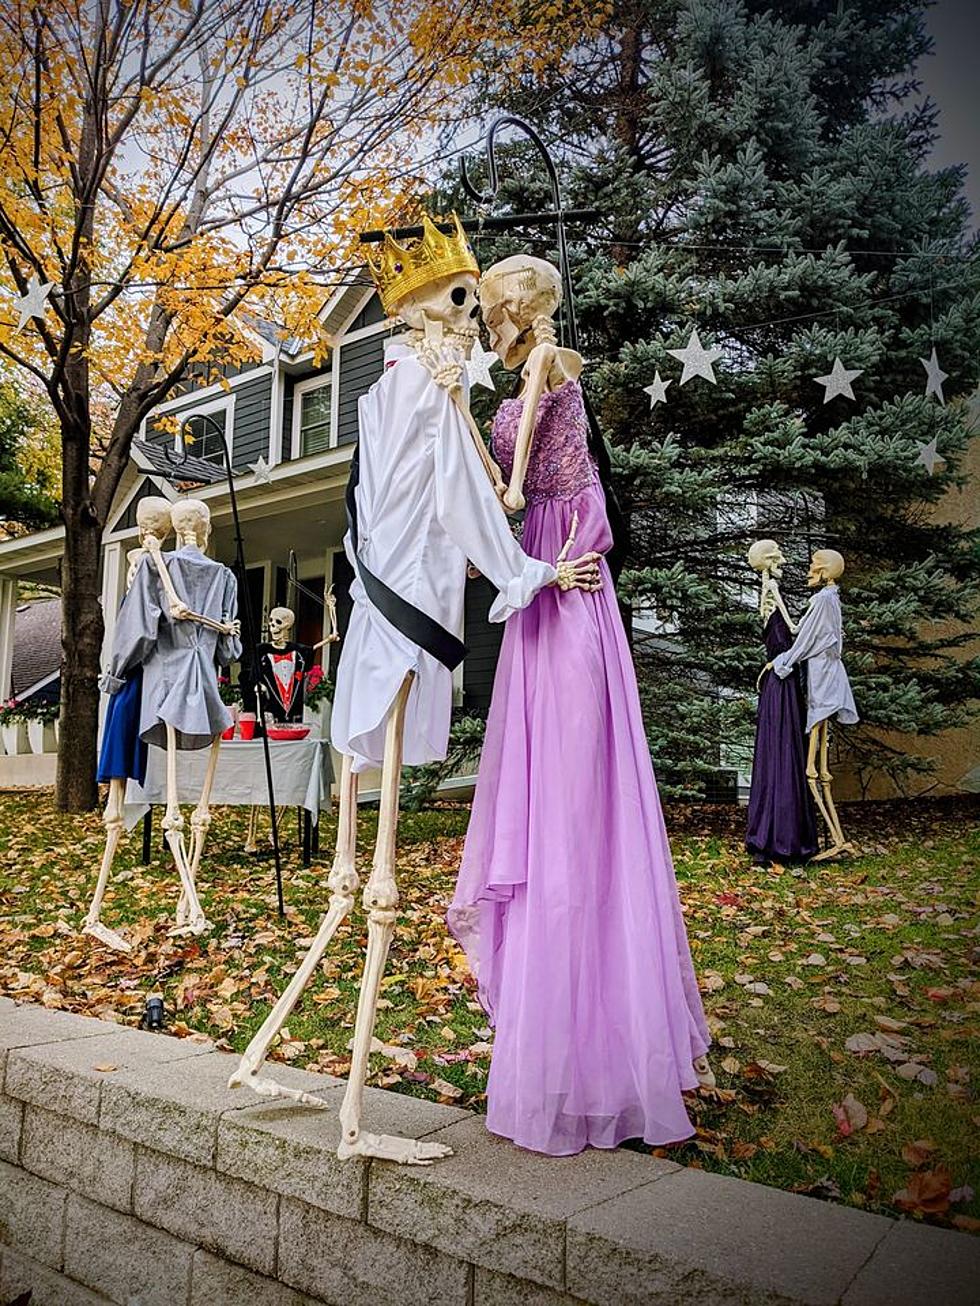 Check Out This Amazing Minneapolis Halloween Display